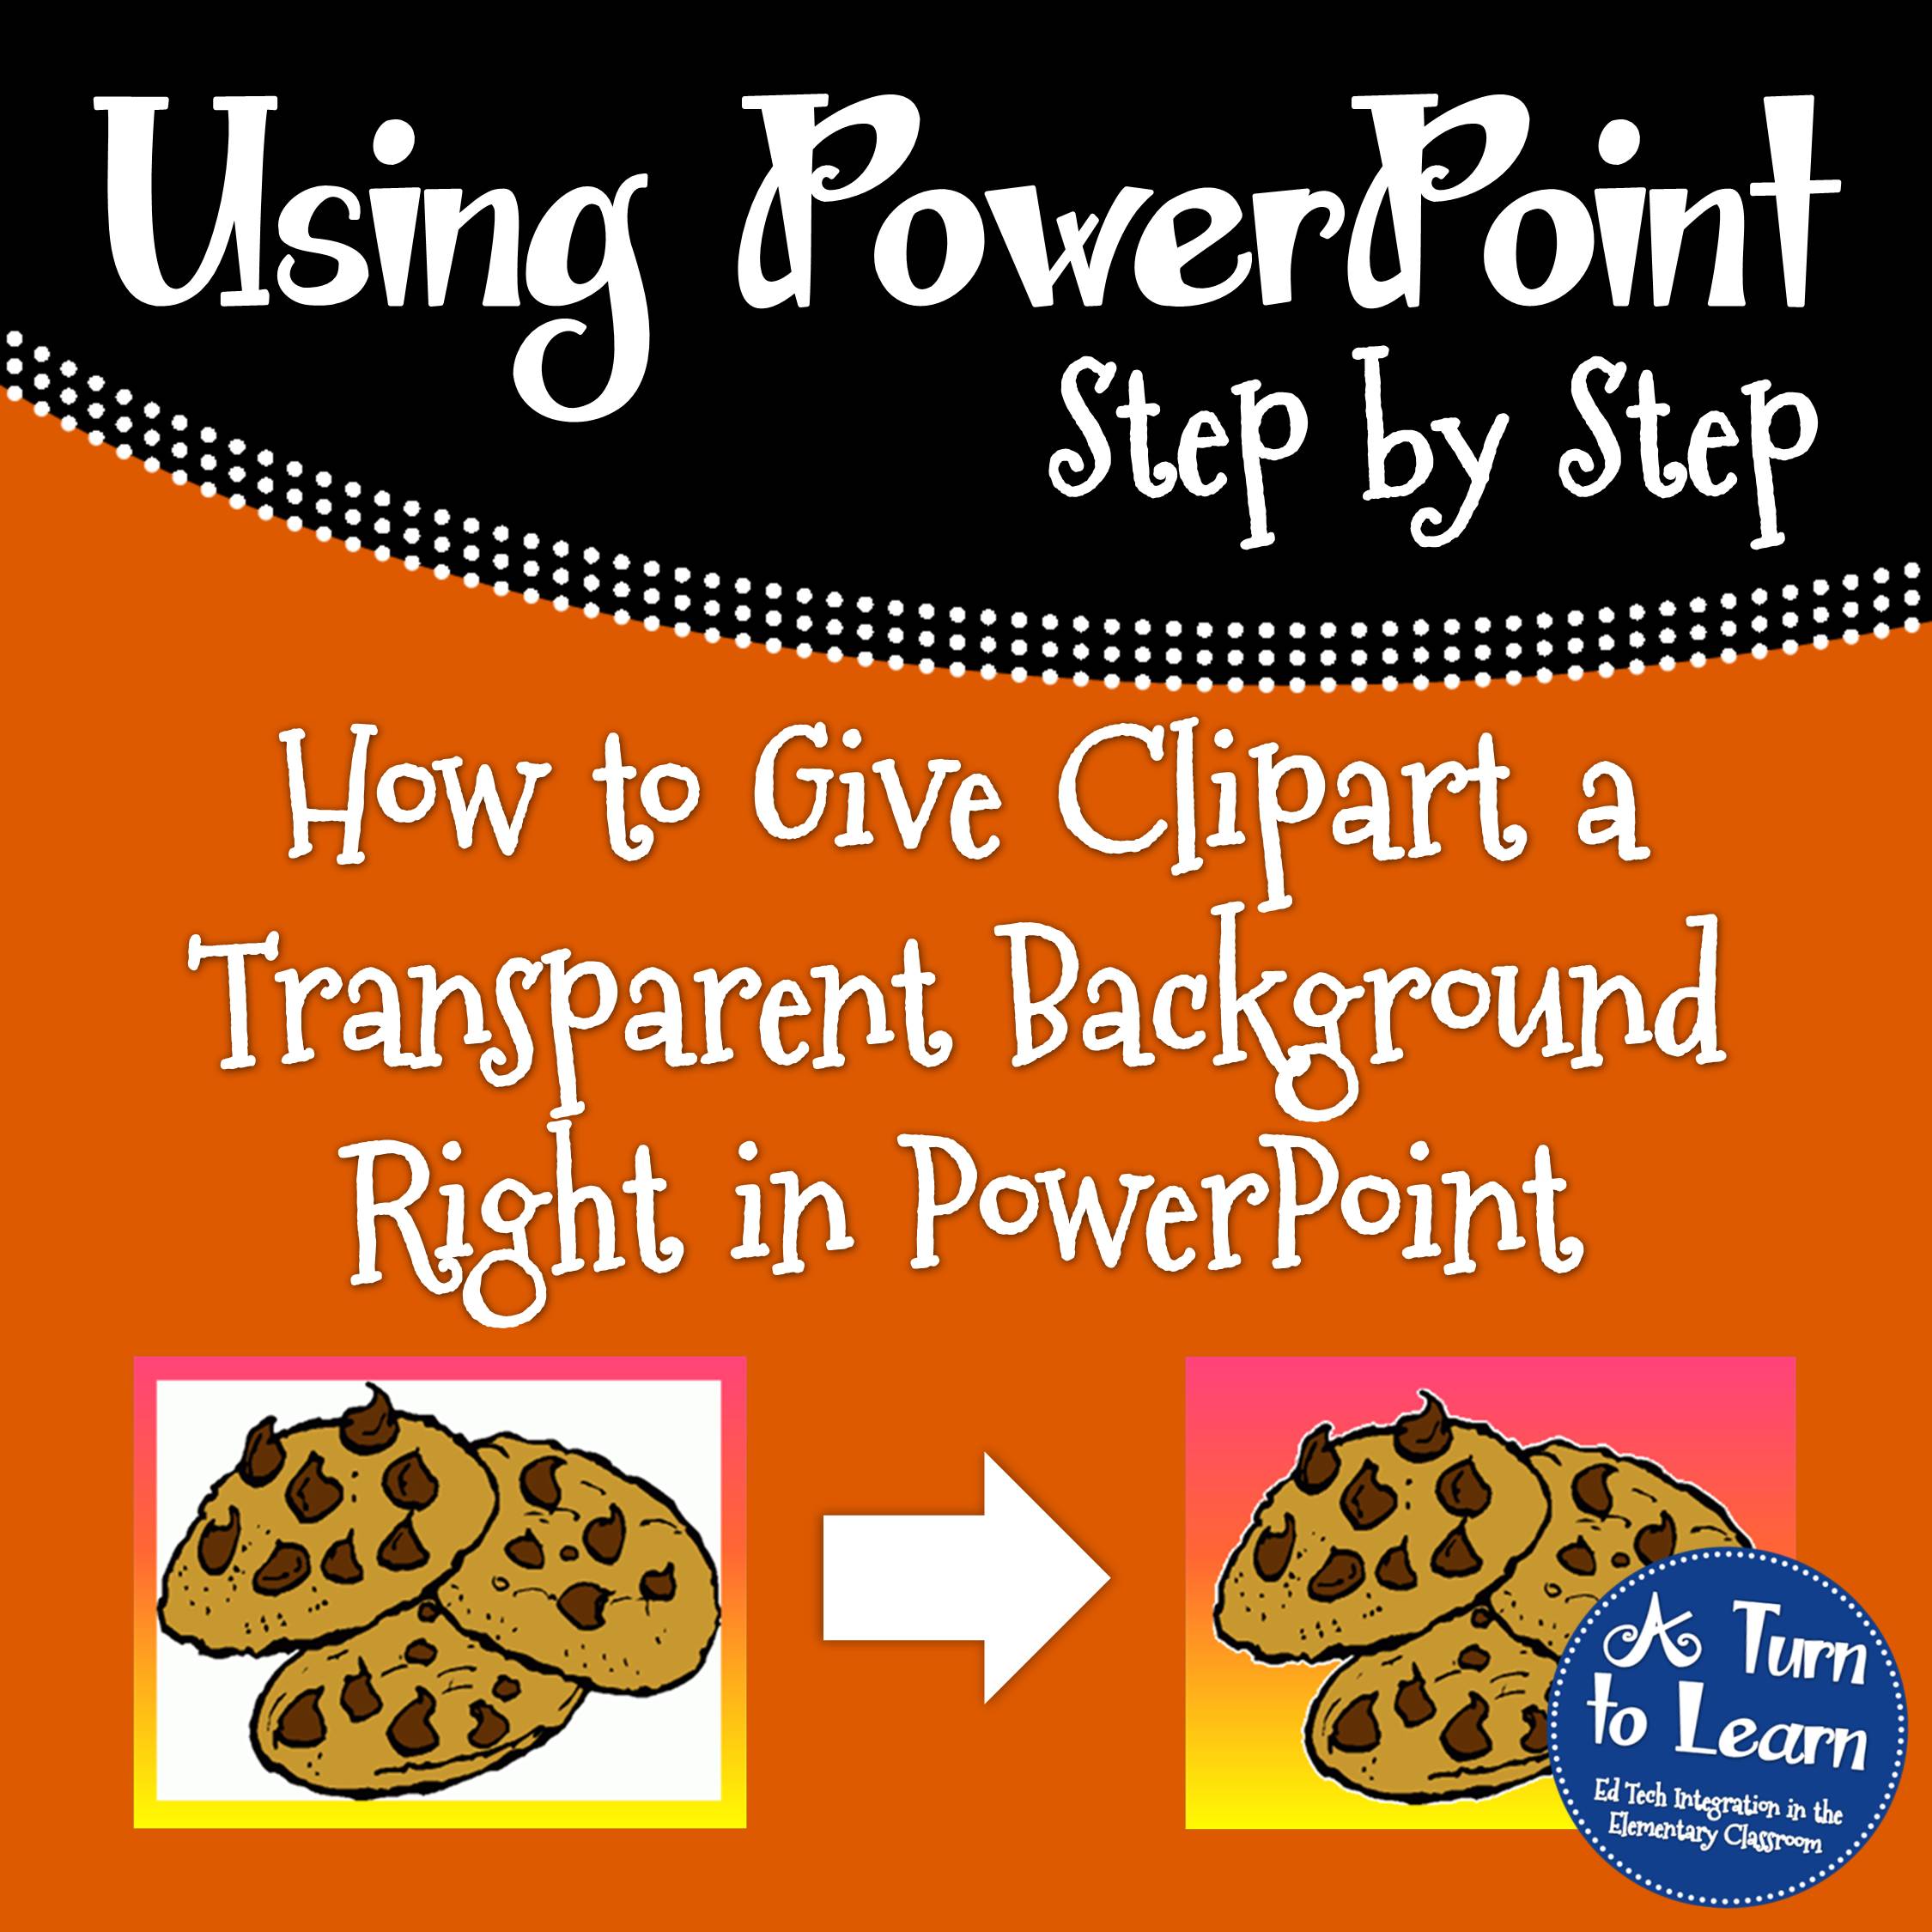 Give Clipart a Transparent Background in PowerPoint! • A Turn to Learn